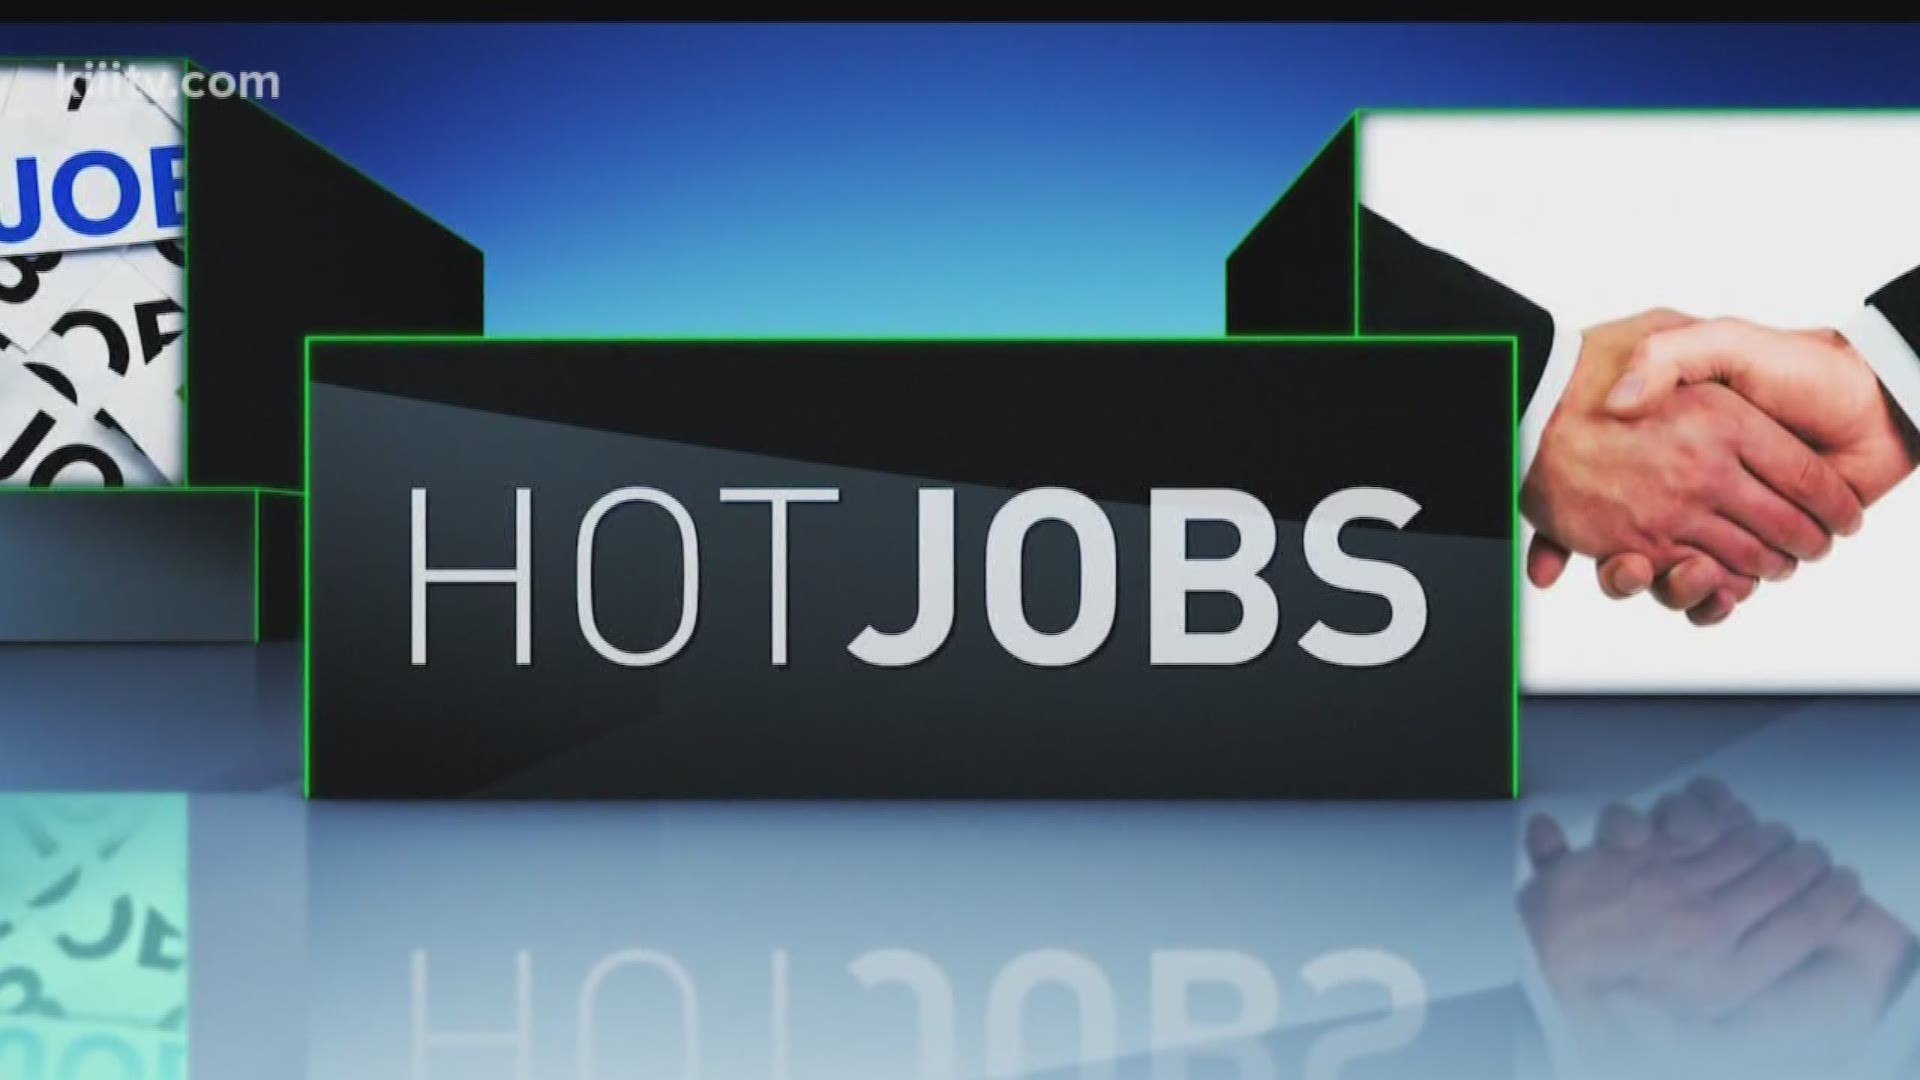 Hot Jobs is a segment that is found every Tuesday, on 3News at 5 p.m.